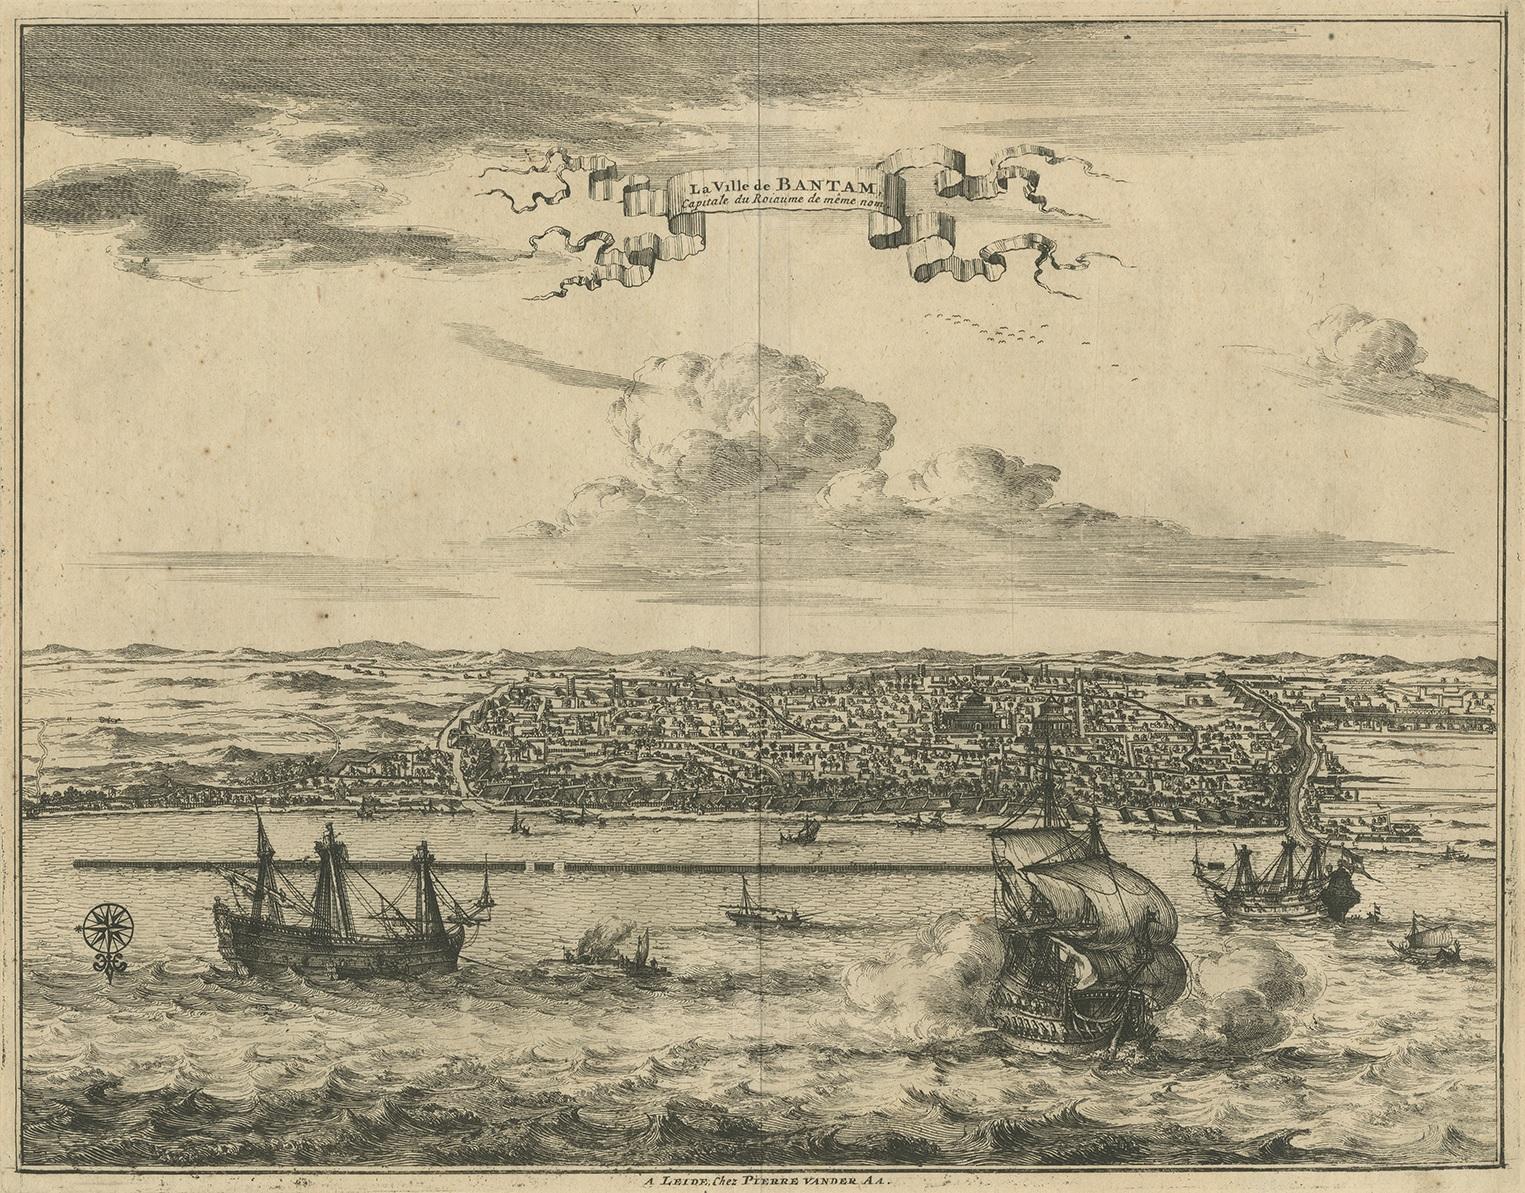 Antique print titled 'La Ville de Bantam capitale du Roiaume de meme nom'. A bird's eye view of the city Banten or Bantam near the western end of Java in Indonesia. Several tall ships and smaller nautical vessels in the harbour. This print